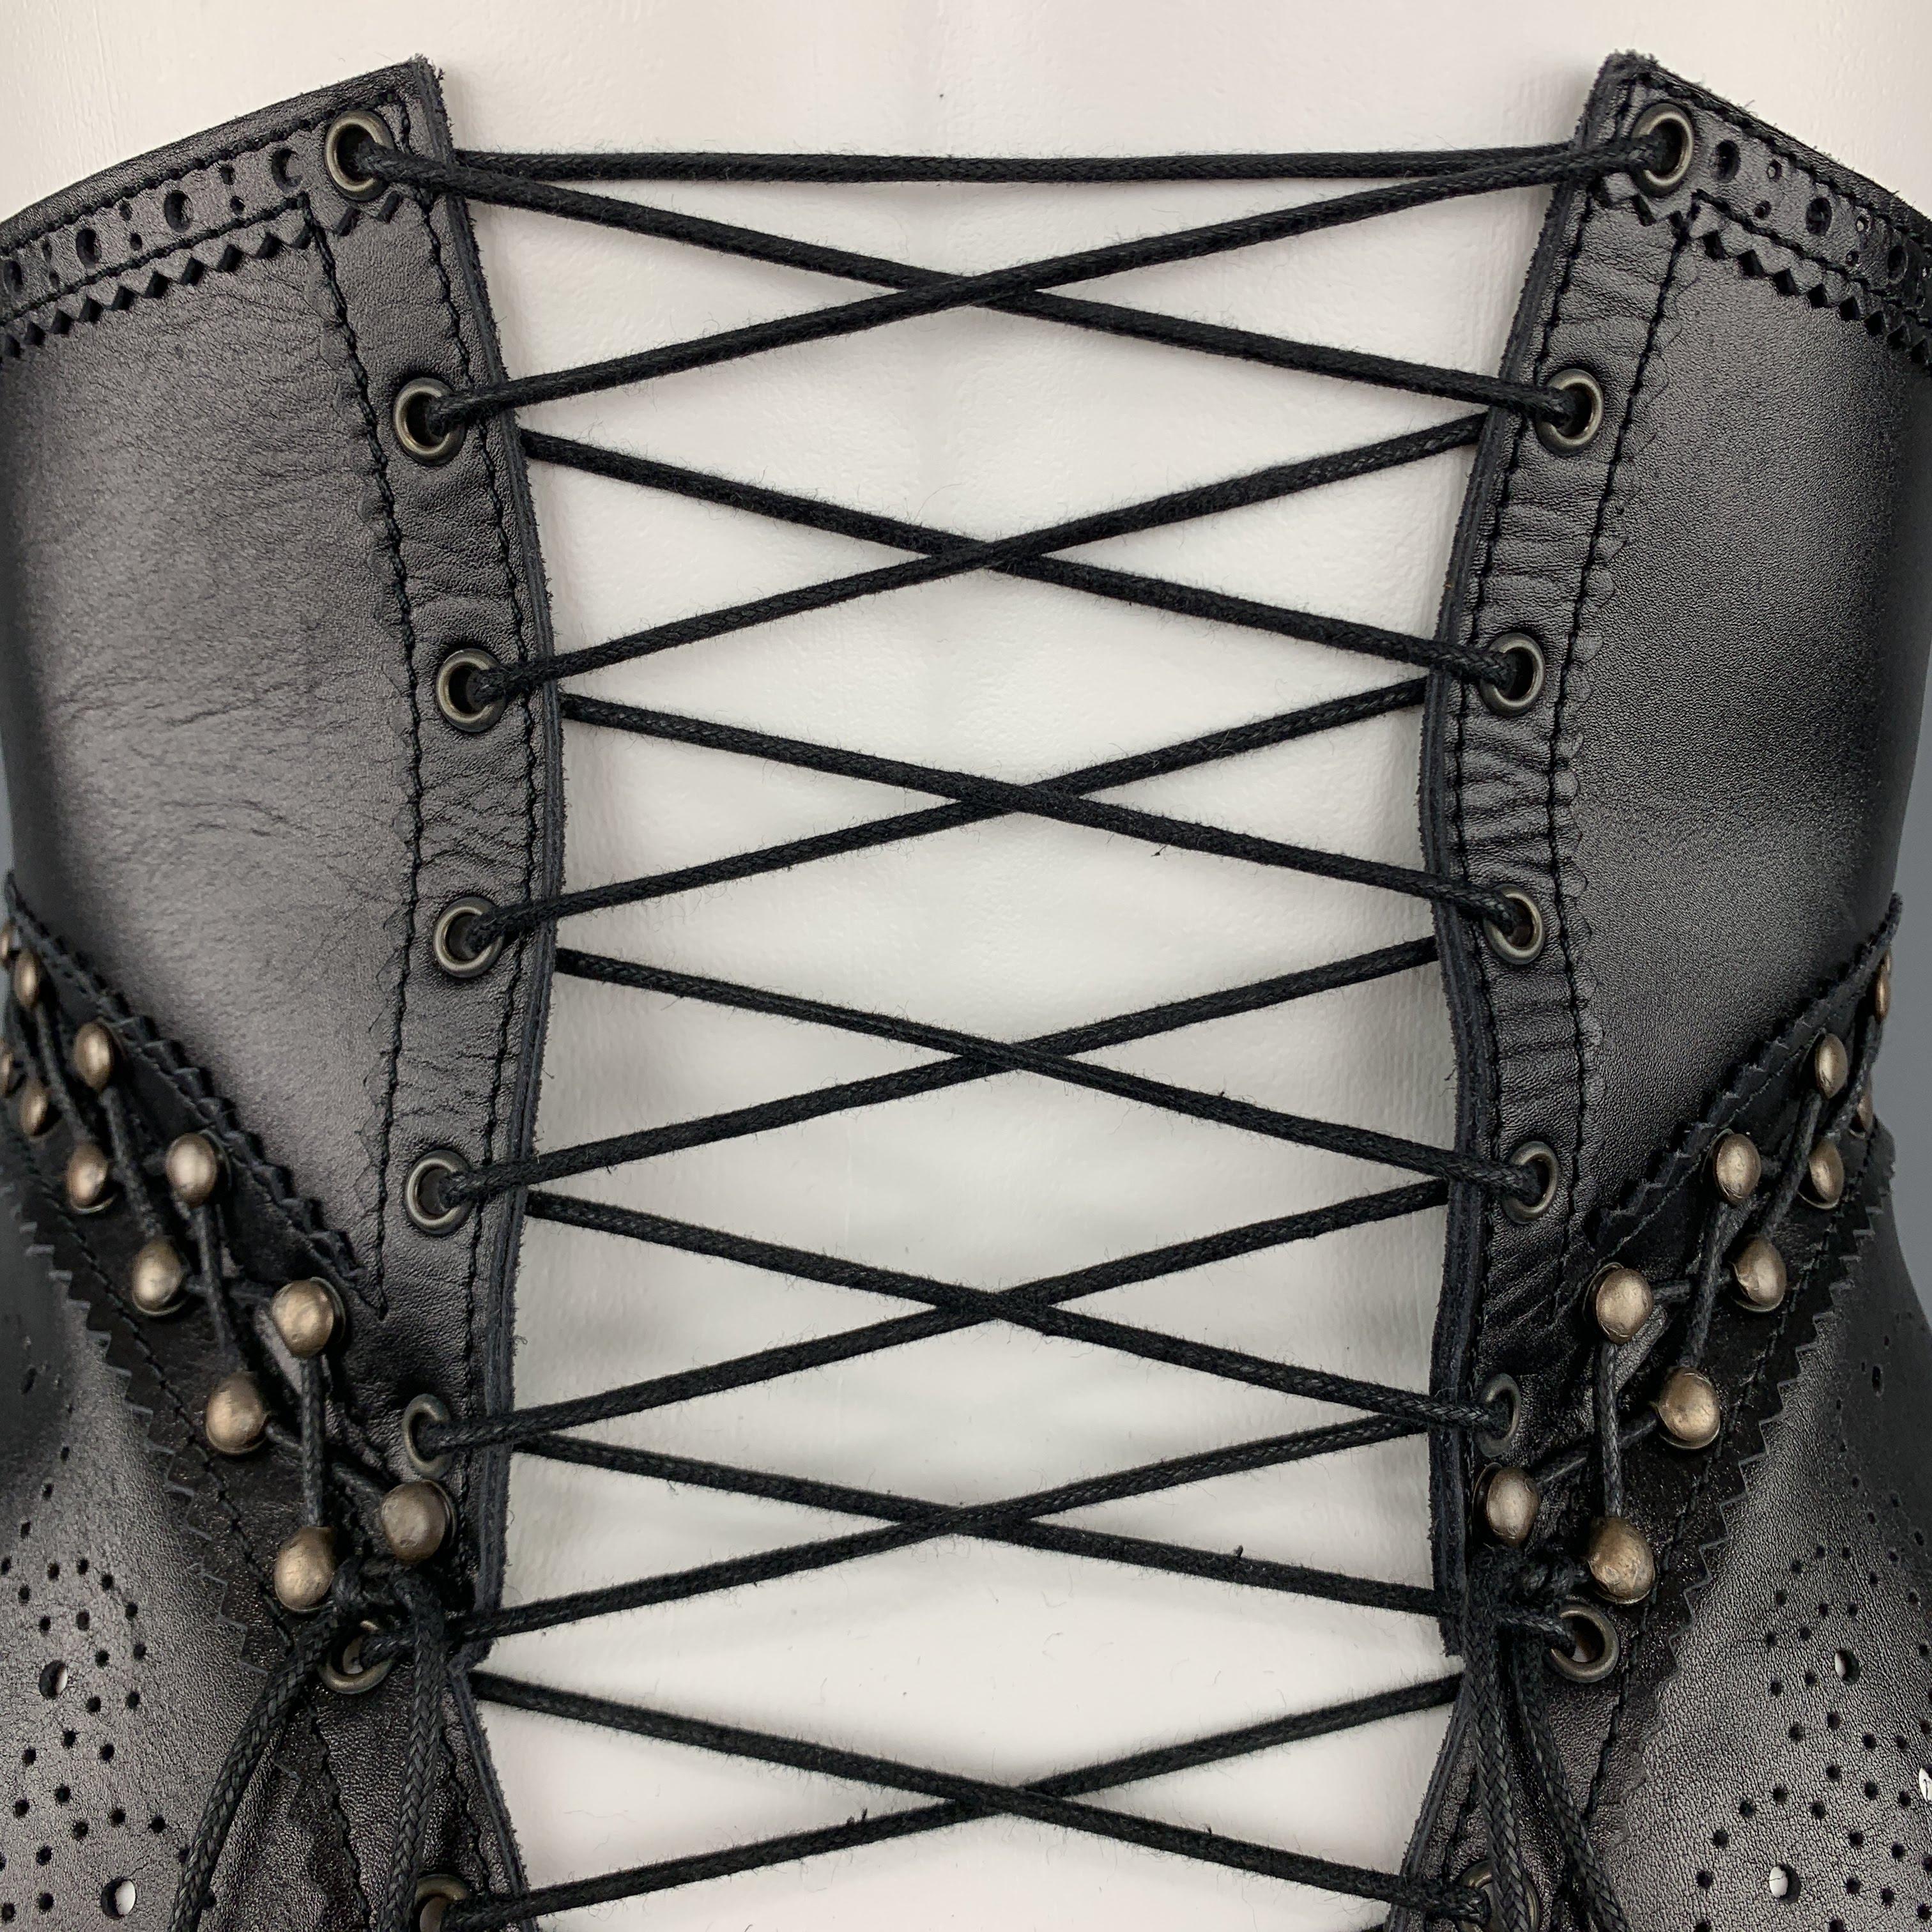 JEAN PAUL GAULTIER Black Leather Perforated Lace Up Whip Stitch Corset Belt 4